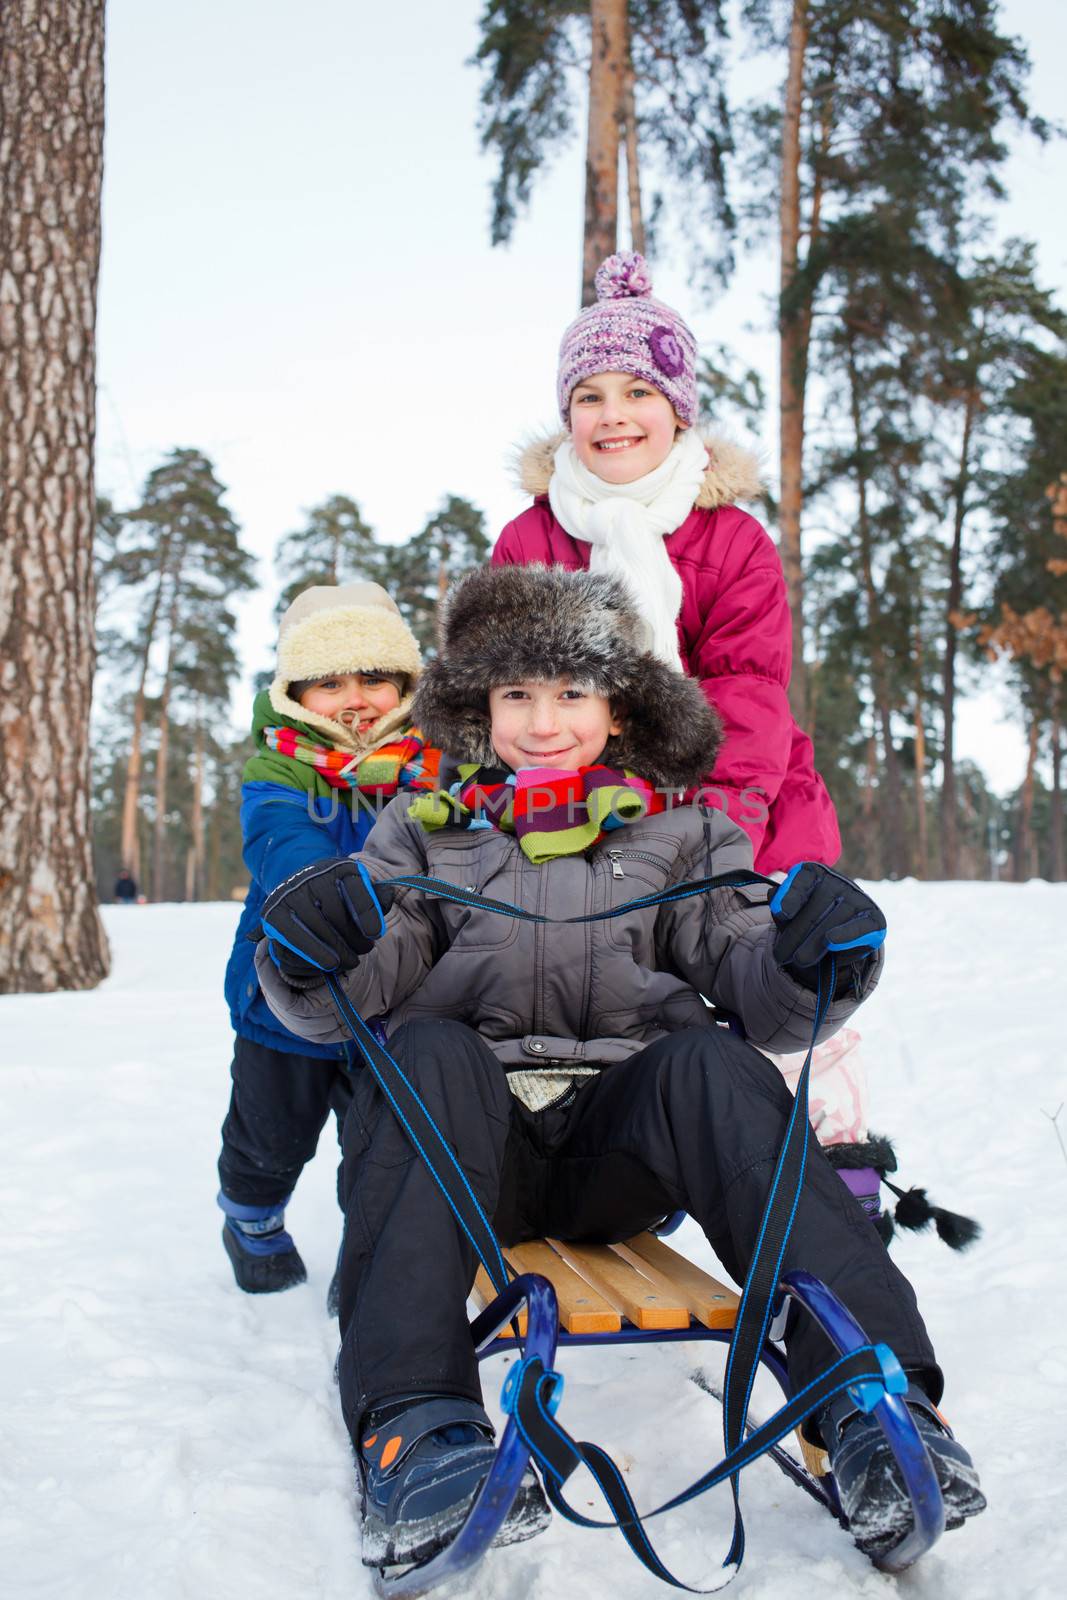 Cute three kids on sleds in snow forest. Focus on the boy